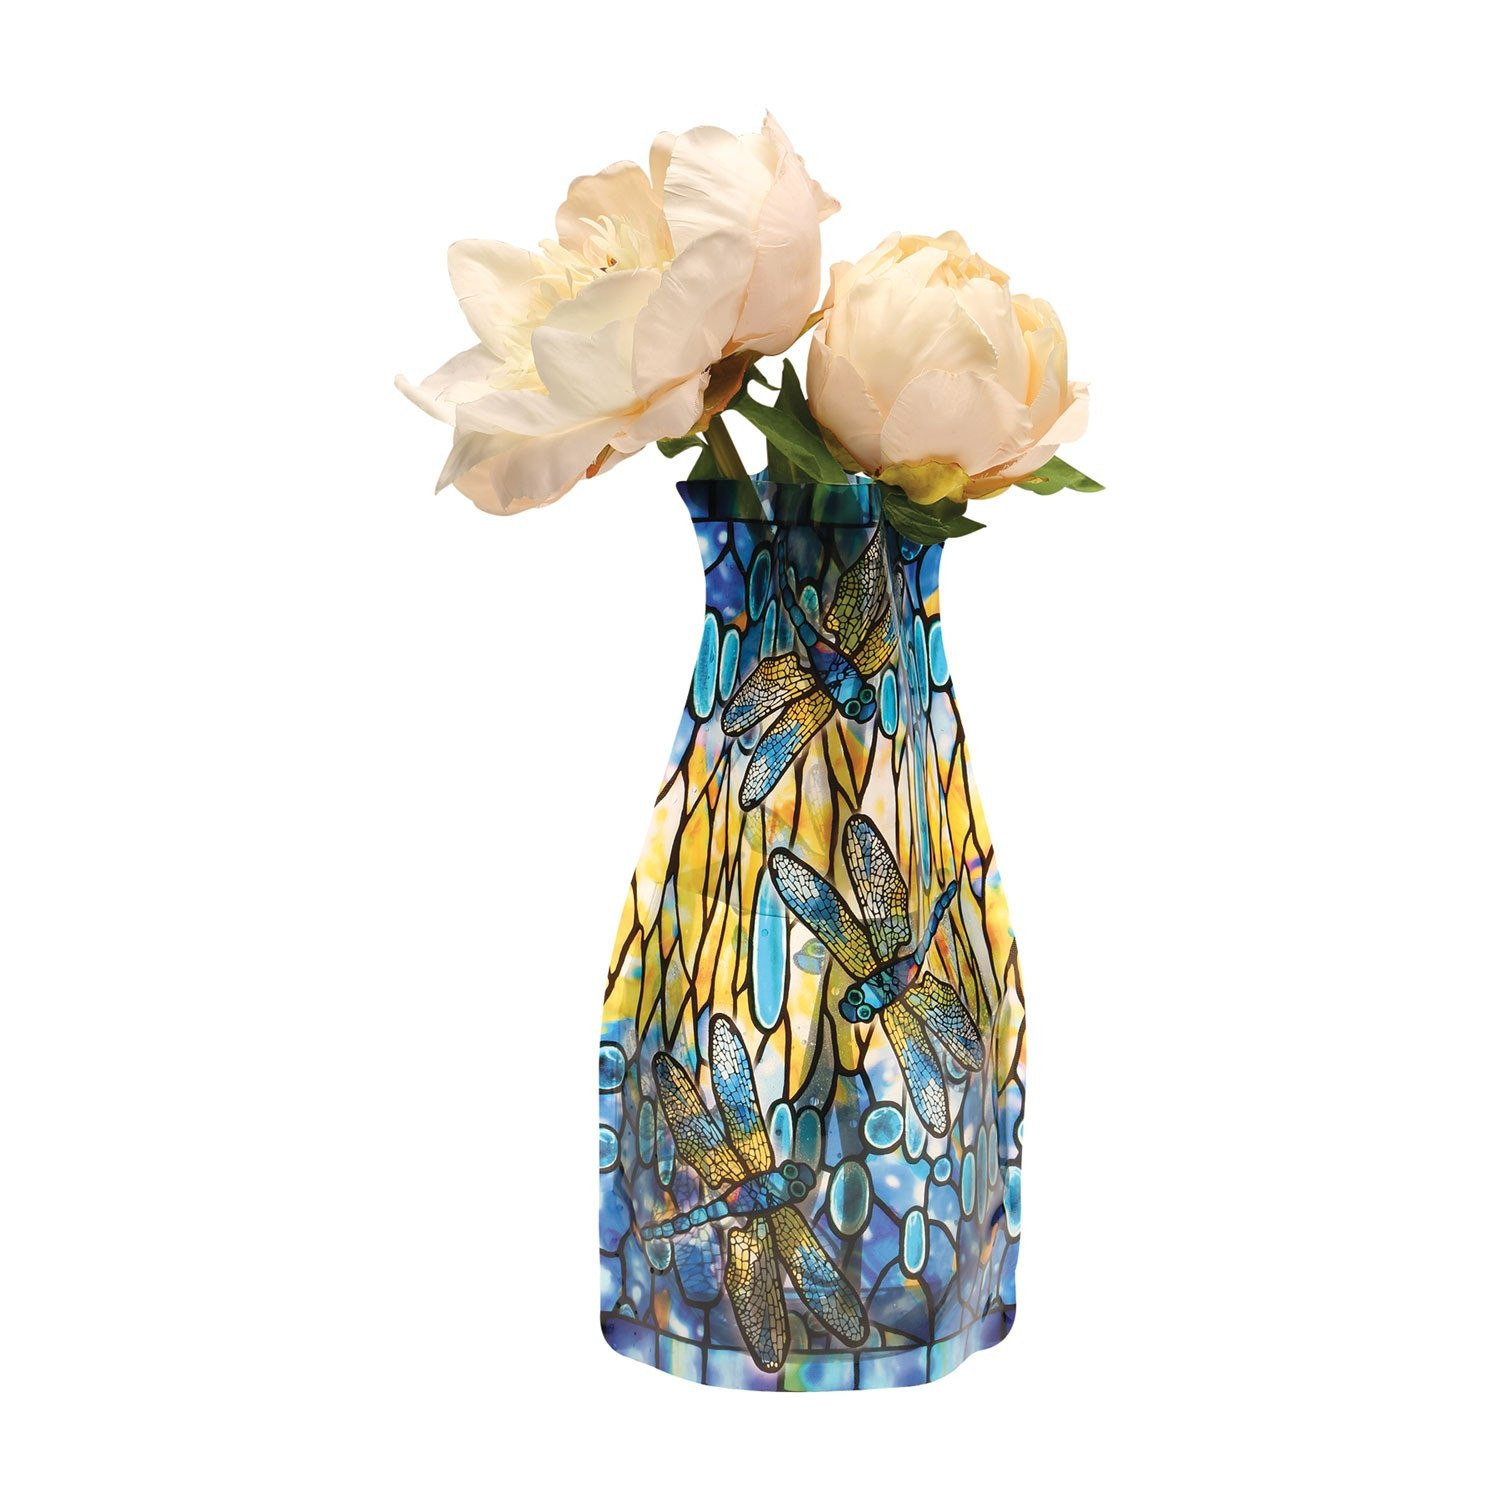 21 Popular Modgy Expandable Vase 2024 free download modgy expandable vase of shop modgy plastic expandable vases tiffany stained glass design throughout shop modgy plastic expandable vases tiffany stained glass design flower holders bpa free 